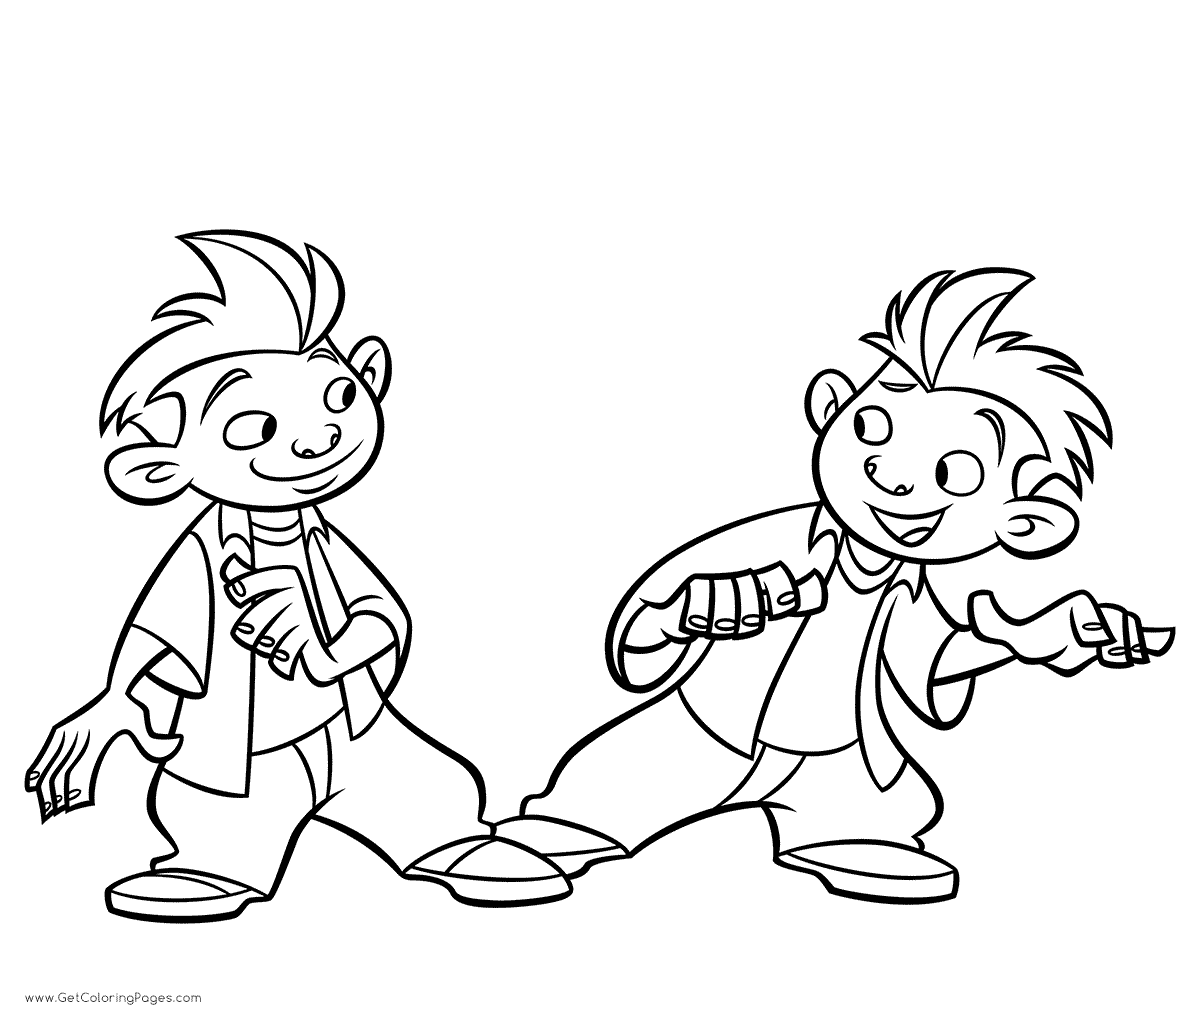 Jim and Tim Coloring Pages